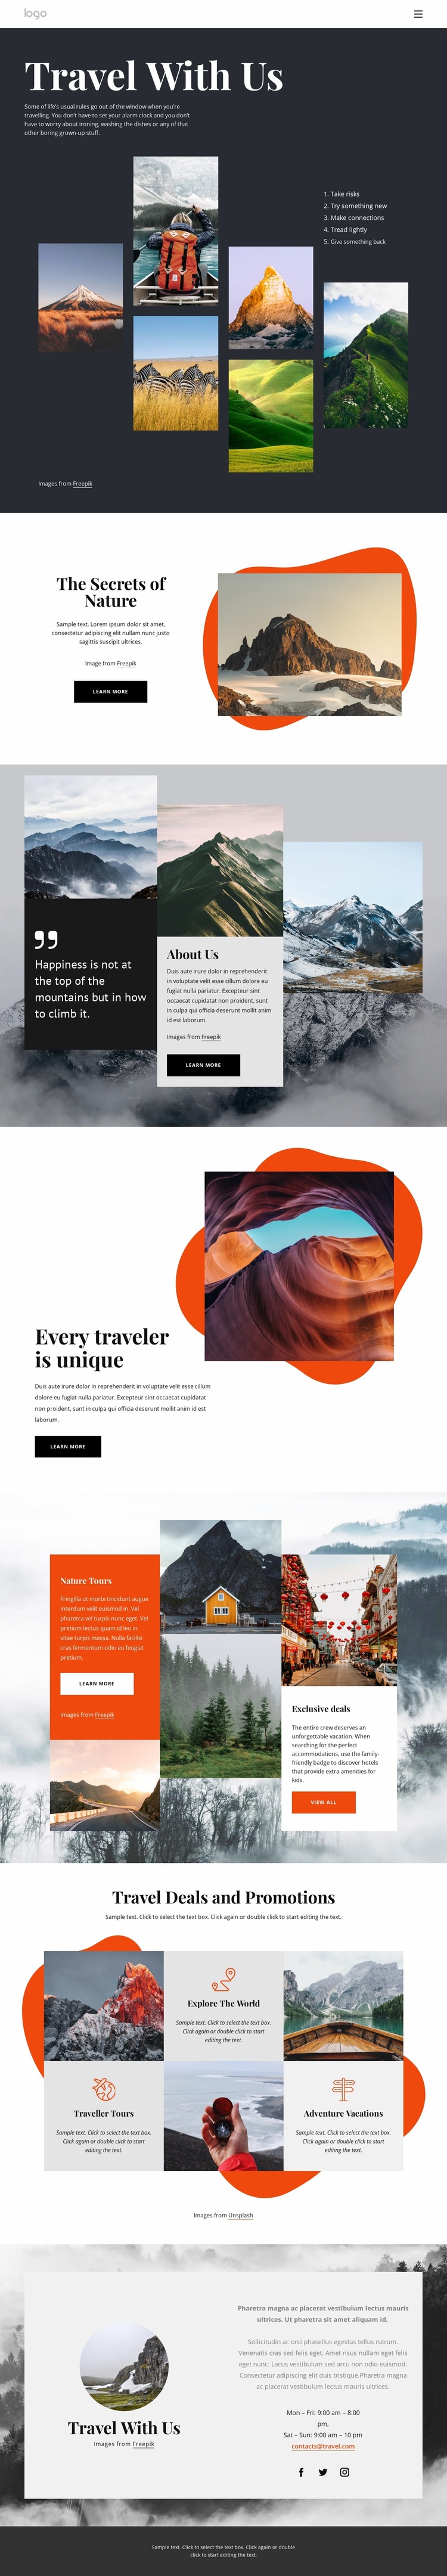 Local and specialized travel agency Website Design